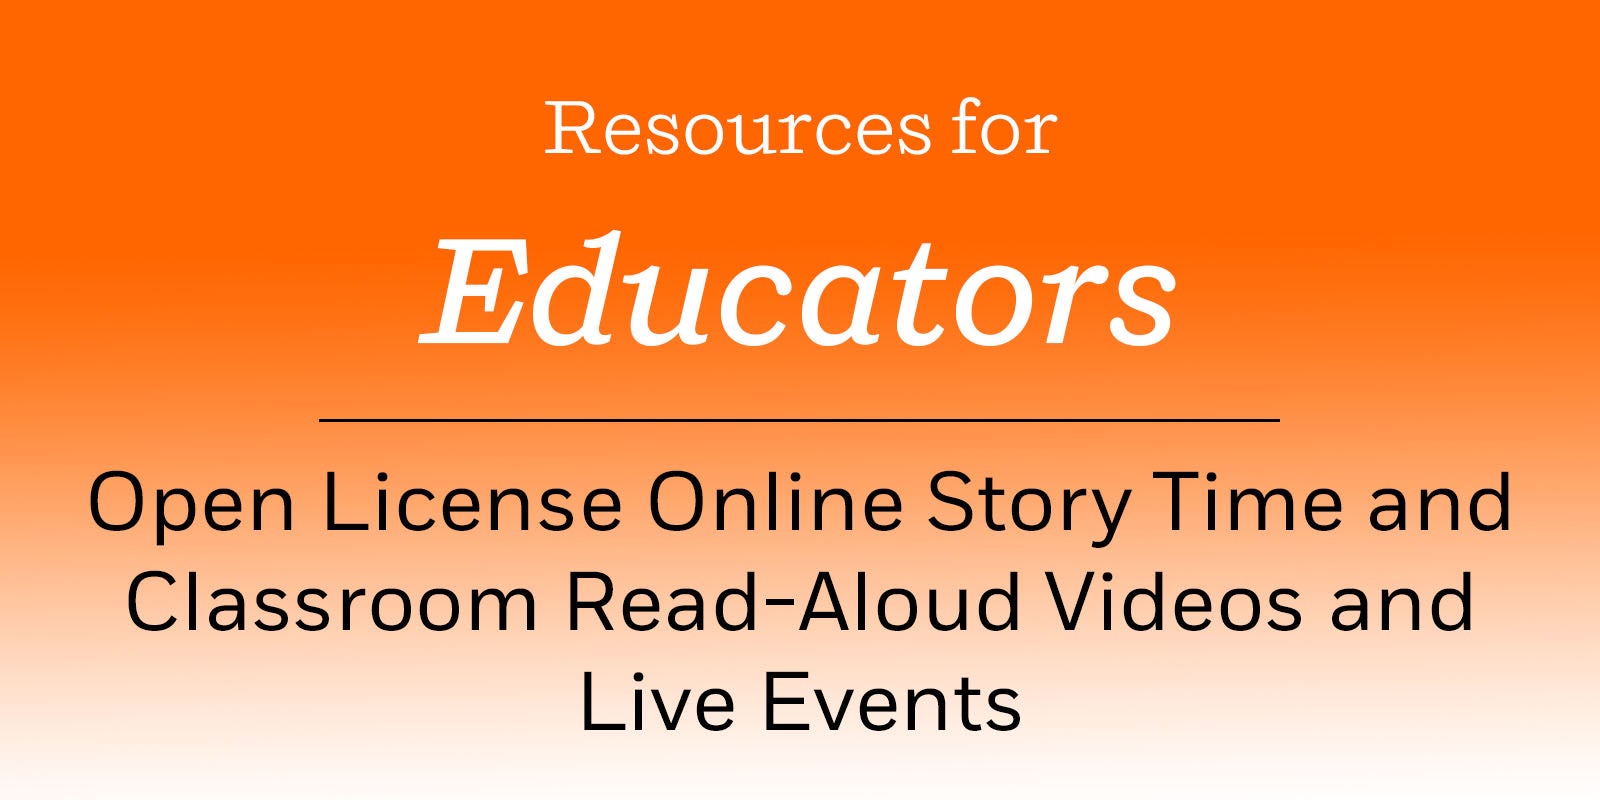 Resources for Educators - Open license online story time and classroom read-aloud videos and live events